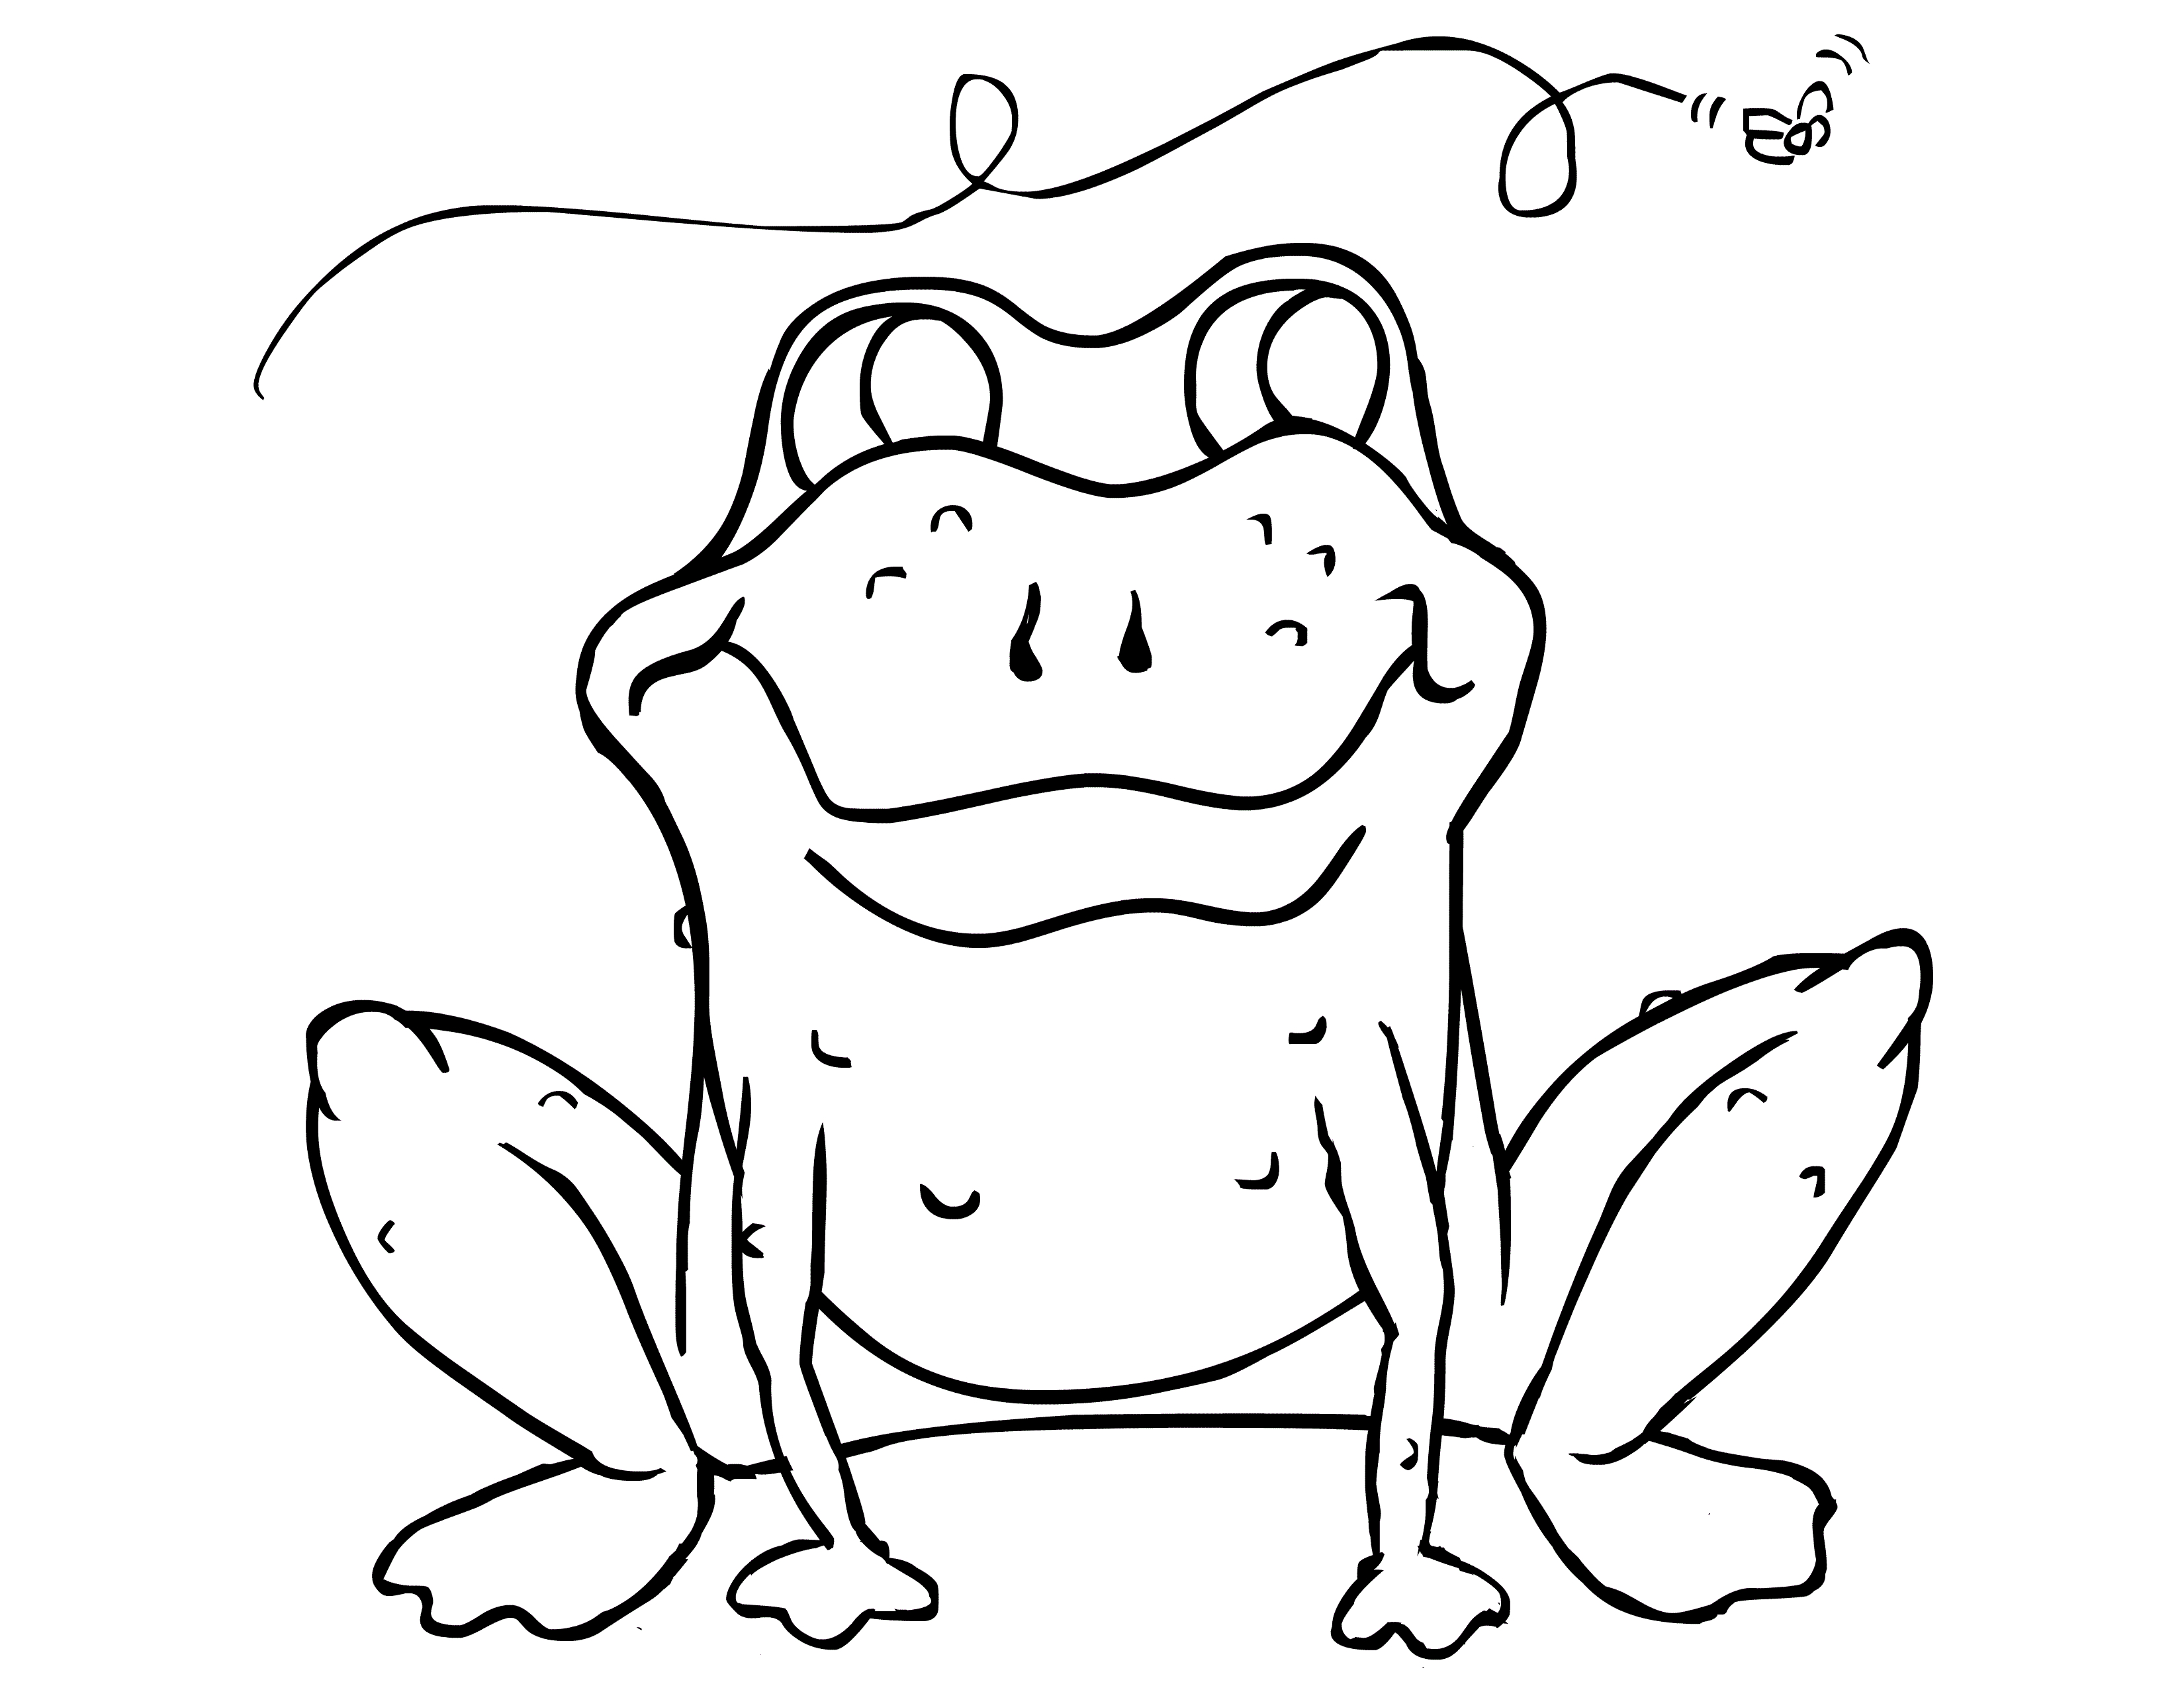 Toad And Toadette Coloring Pages How To Color Toad And Toadette Super Mario Nintendo Coloring Page In